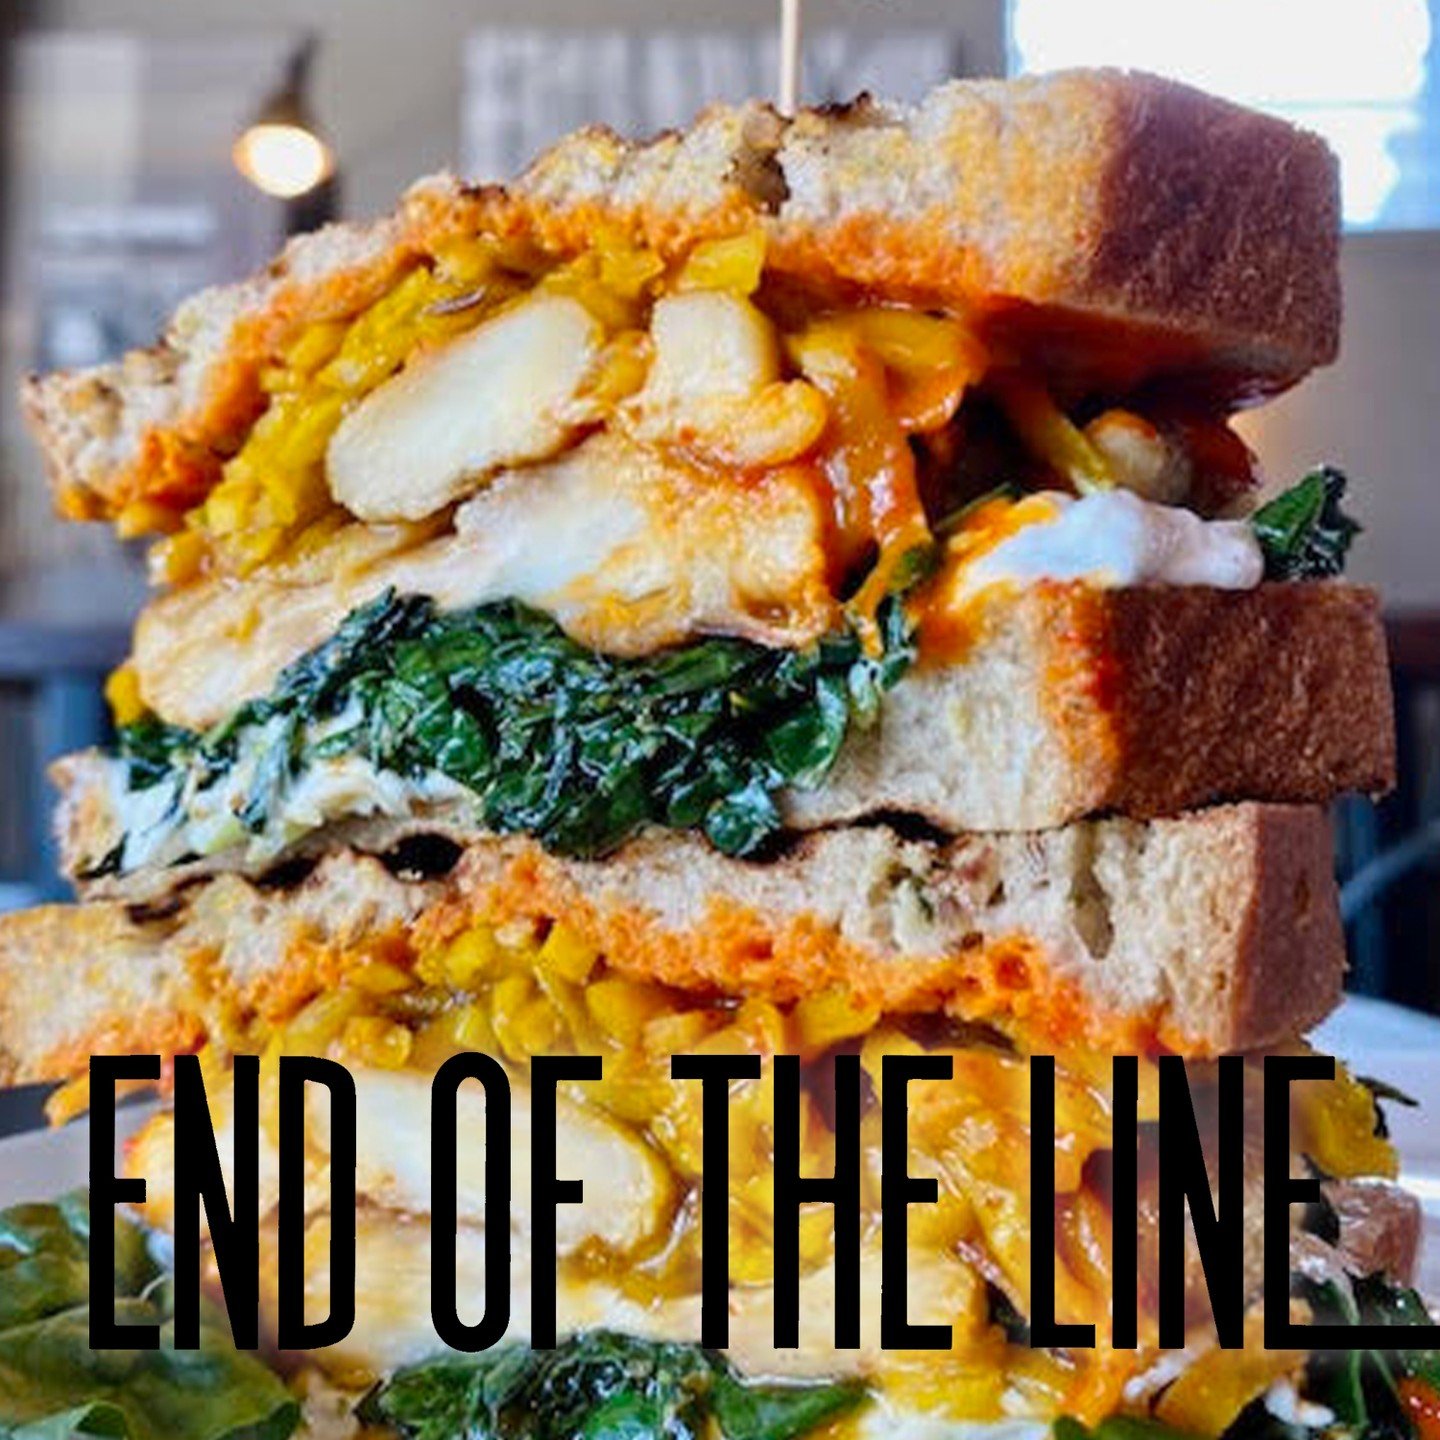 Stop by End of the Line and grab today's special, The Pick! Featuring truffled lion's mane, garlic saut&eacute;ed kale, fermented beets, green onion cream cheese, and red pepper coulis, on dill pickle rye.

#vegansandwiches #downtownpensacola #lunchs